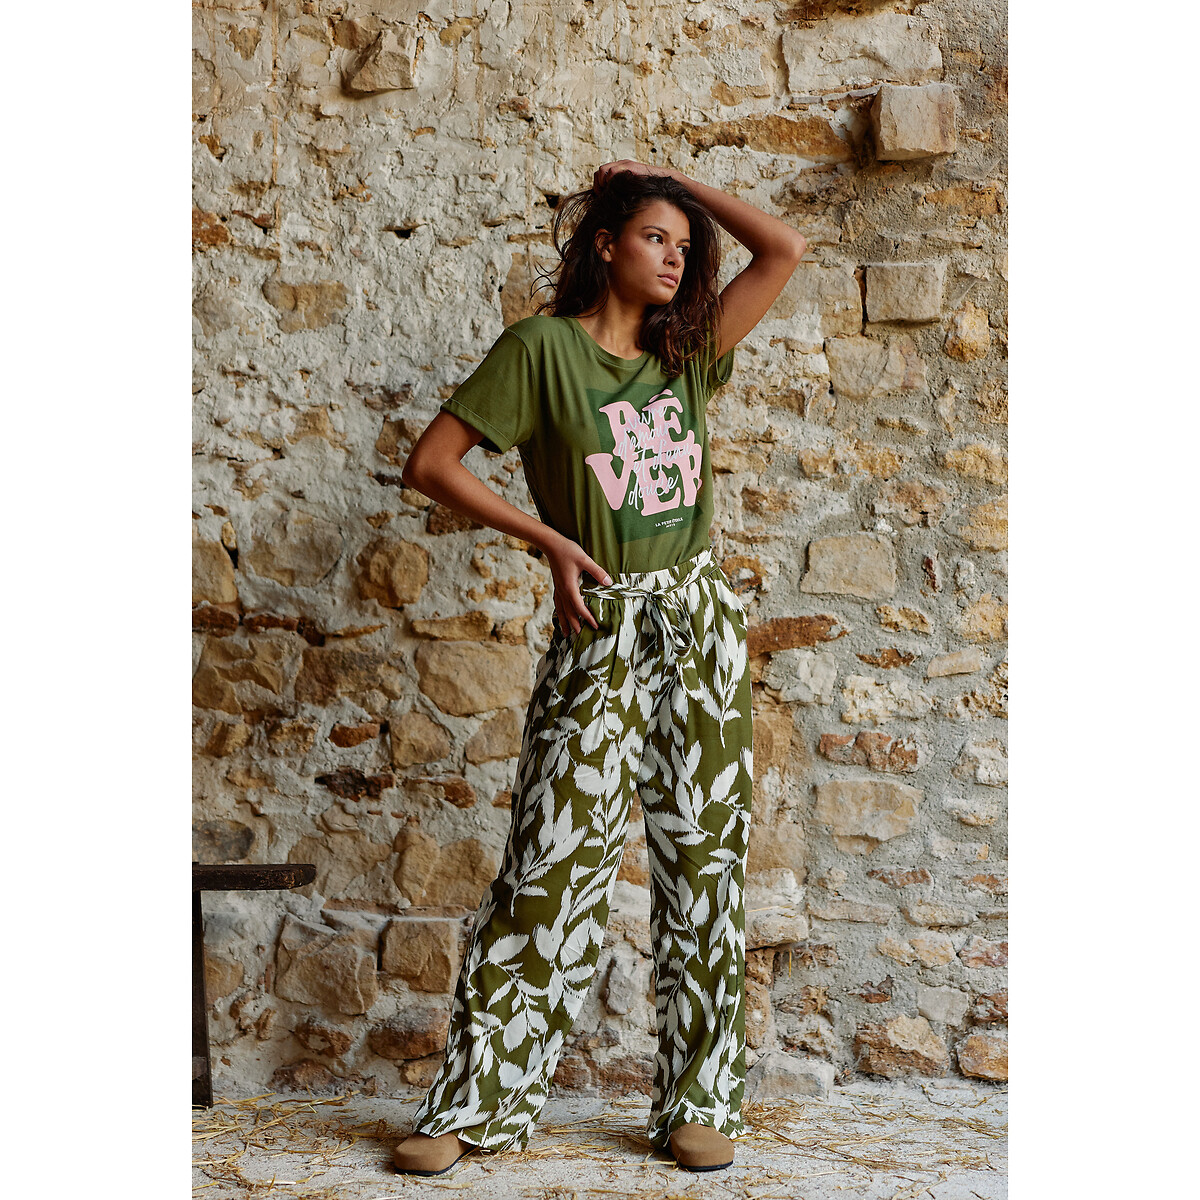 Purlo Cotton Loose Fit Trousers in Leaf Print